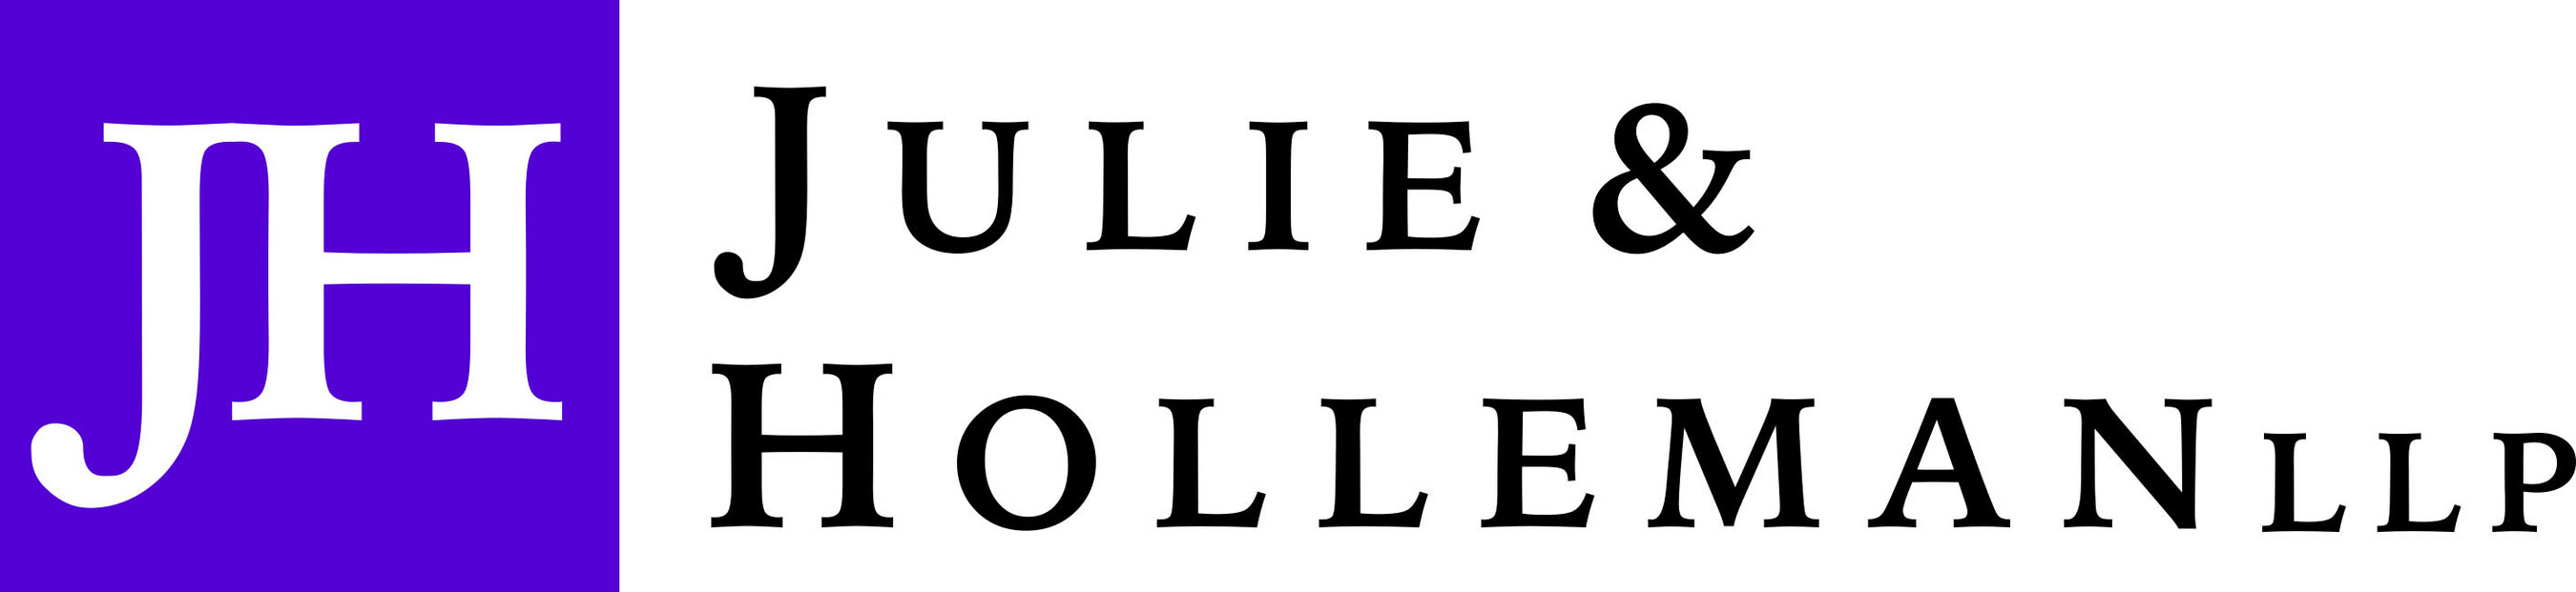 Julie & Holleman LLP is a boutique law firm that focuses on shareholder litigation, including derivative actions, mergers and acquisitions cases, securities fraud class actions, and corporate investigations. (PRNewsfoto/Julie & Holleman LLP)